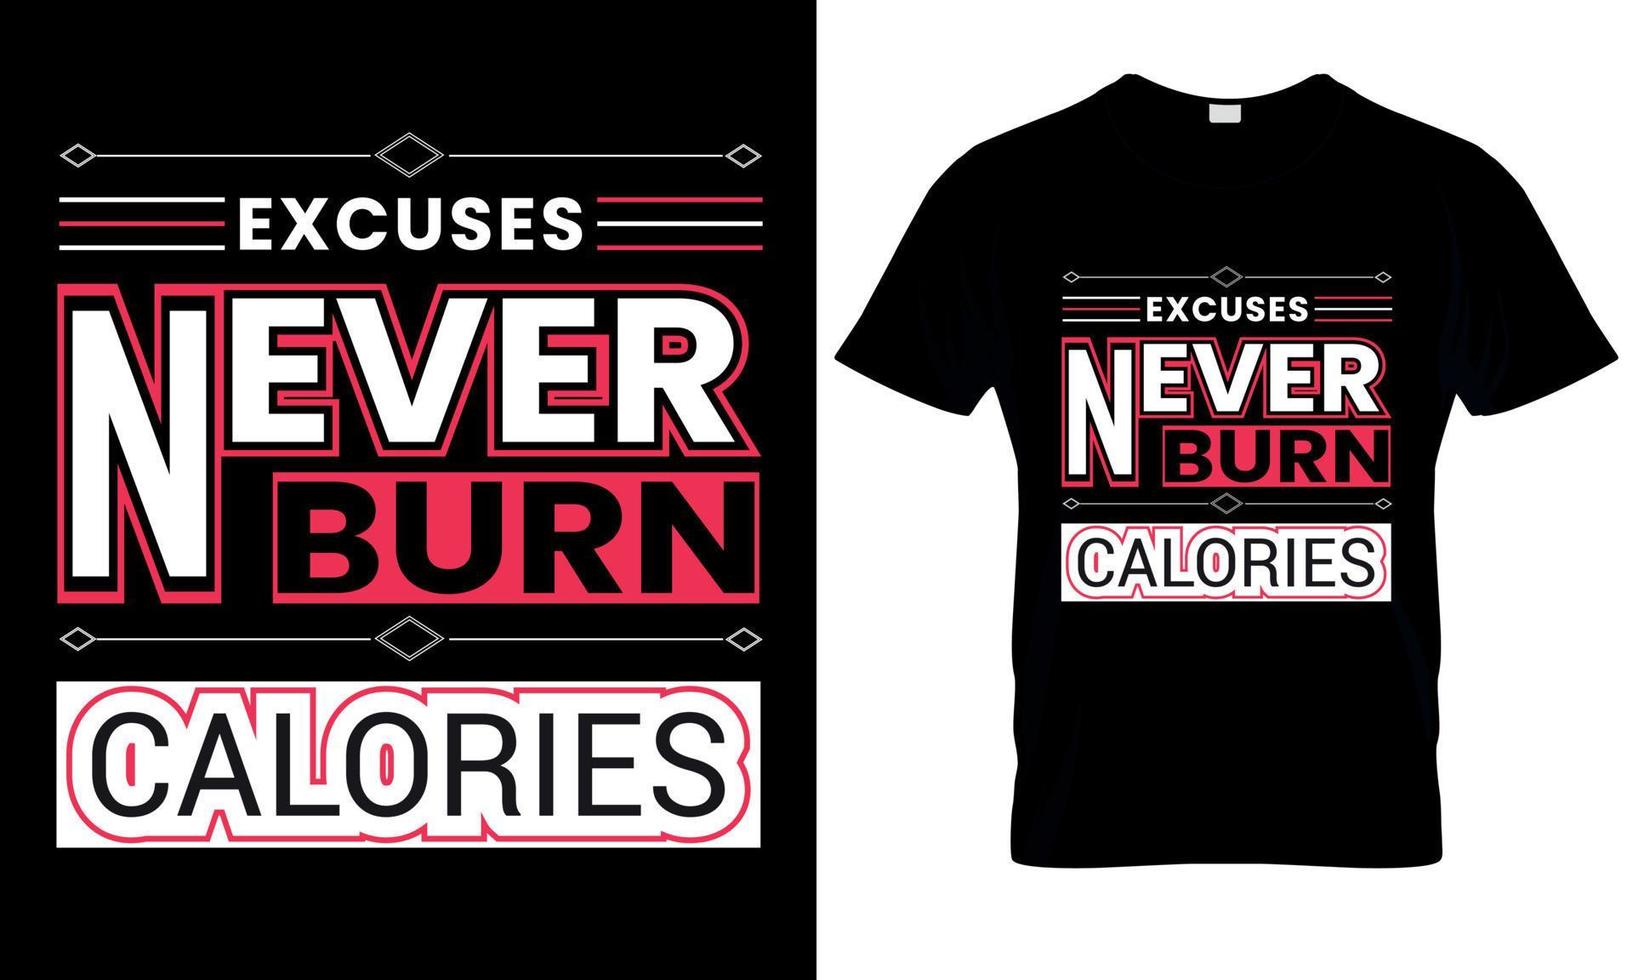 Excuses never burn calories typography t-shirt design vector